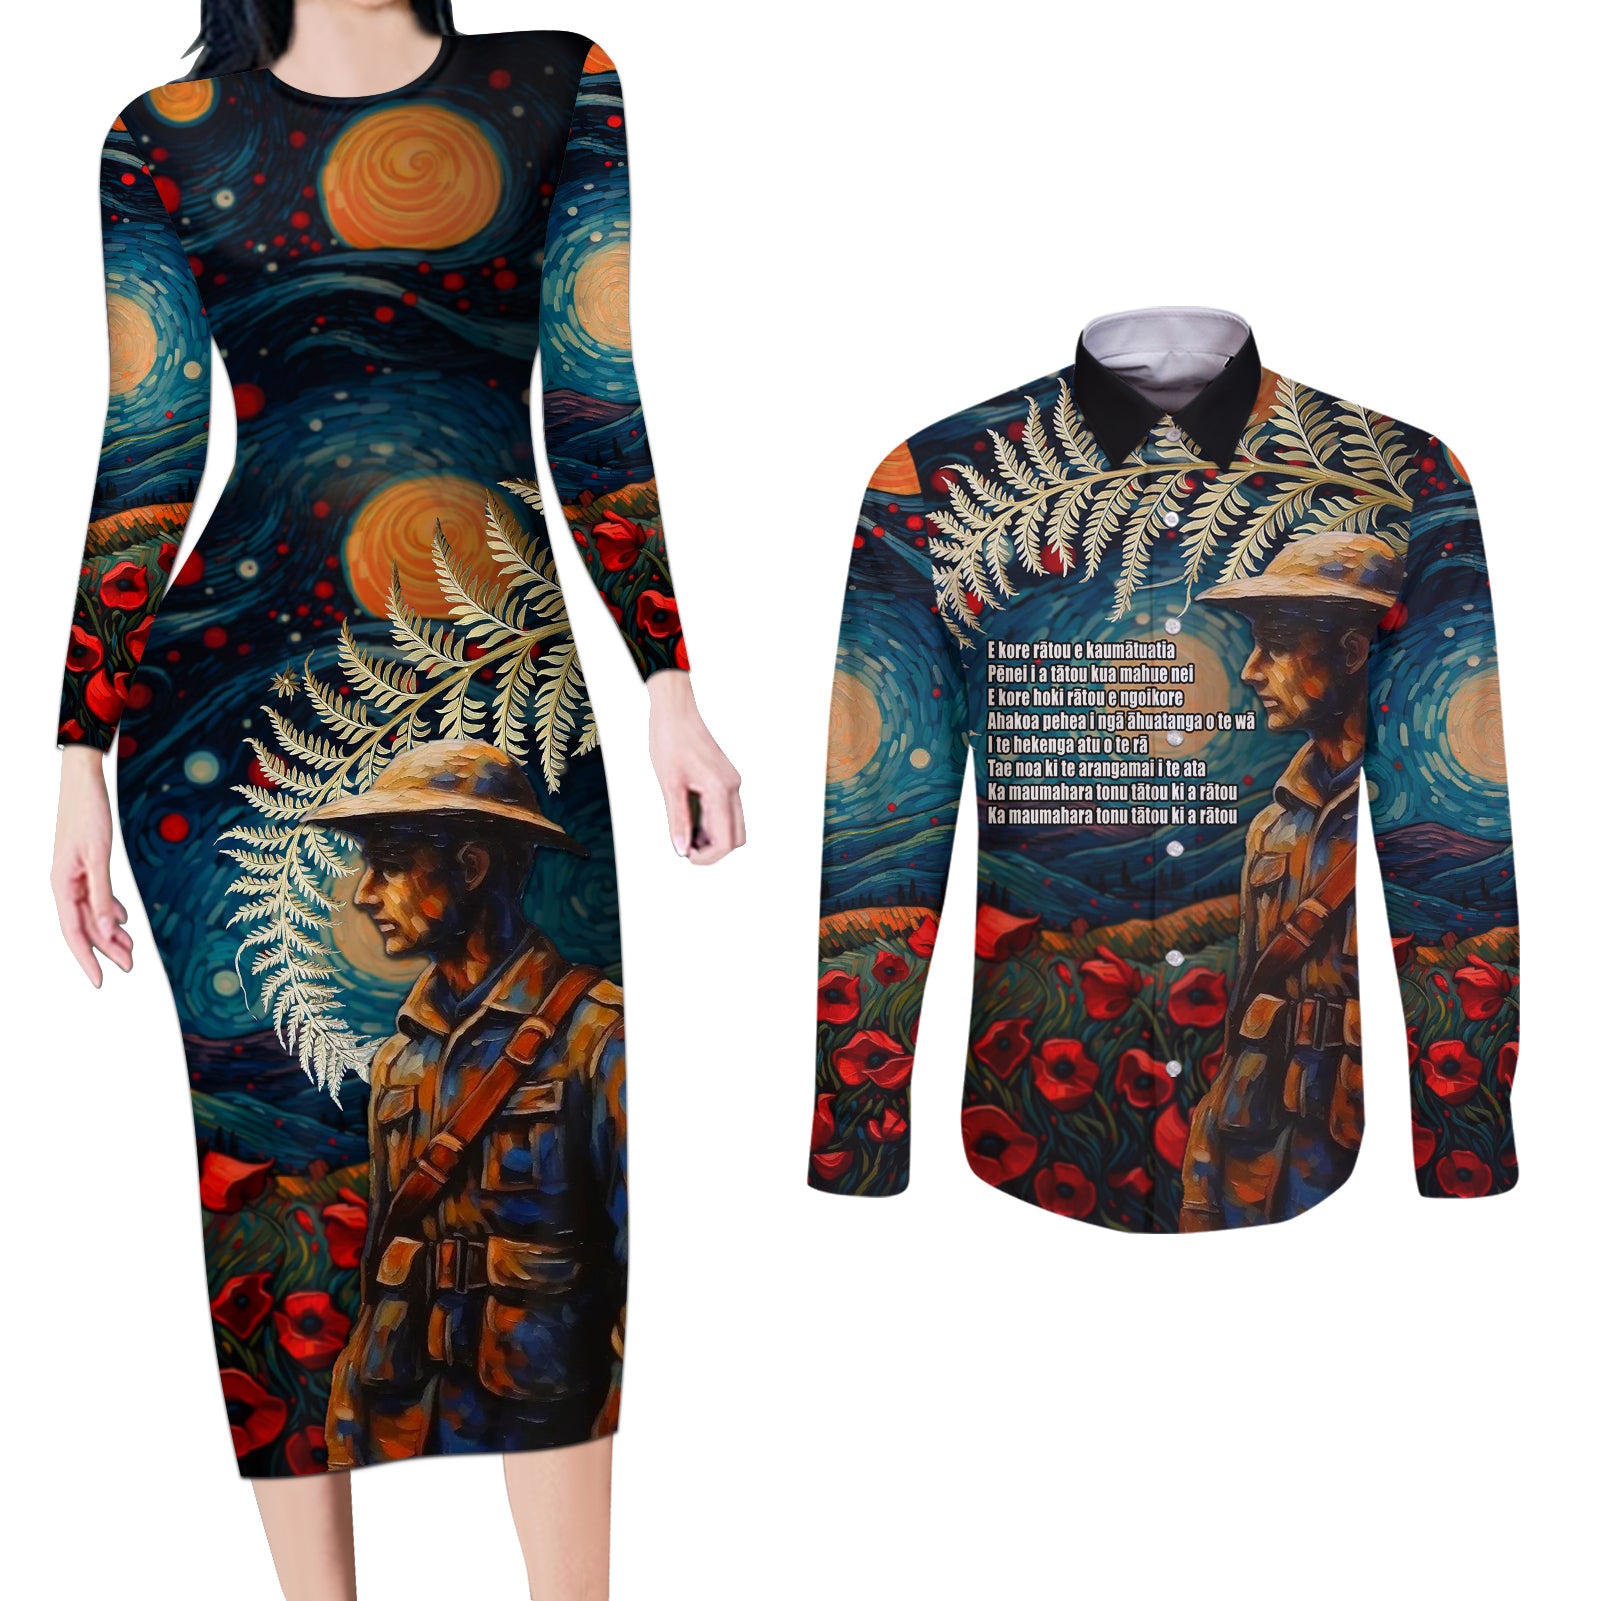 New Zealand Soldier ANZAC Day Couples Matching Long Sleeve Bodycon Dress and Long Sleeve Button Shirt Silver Fern Starry Night Style LT03 Blue - Polynesian Pride